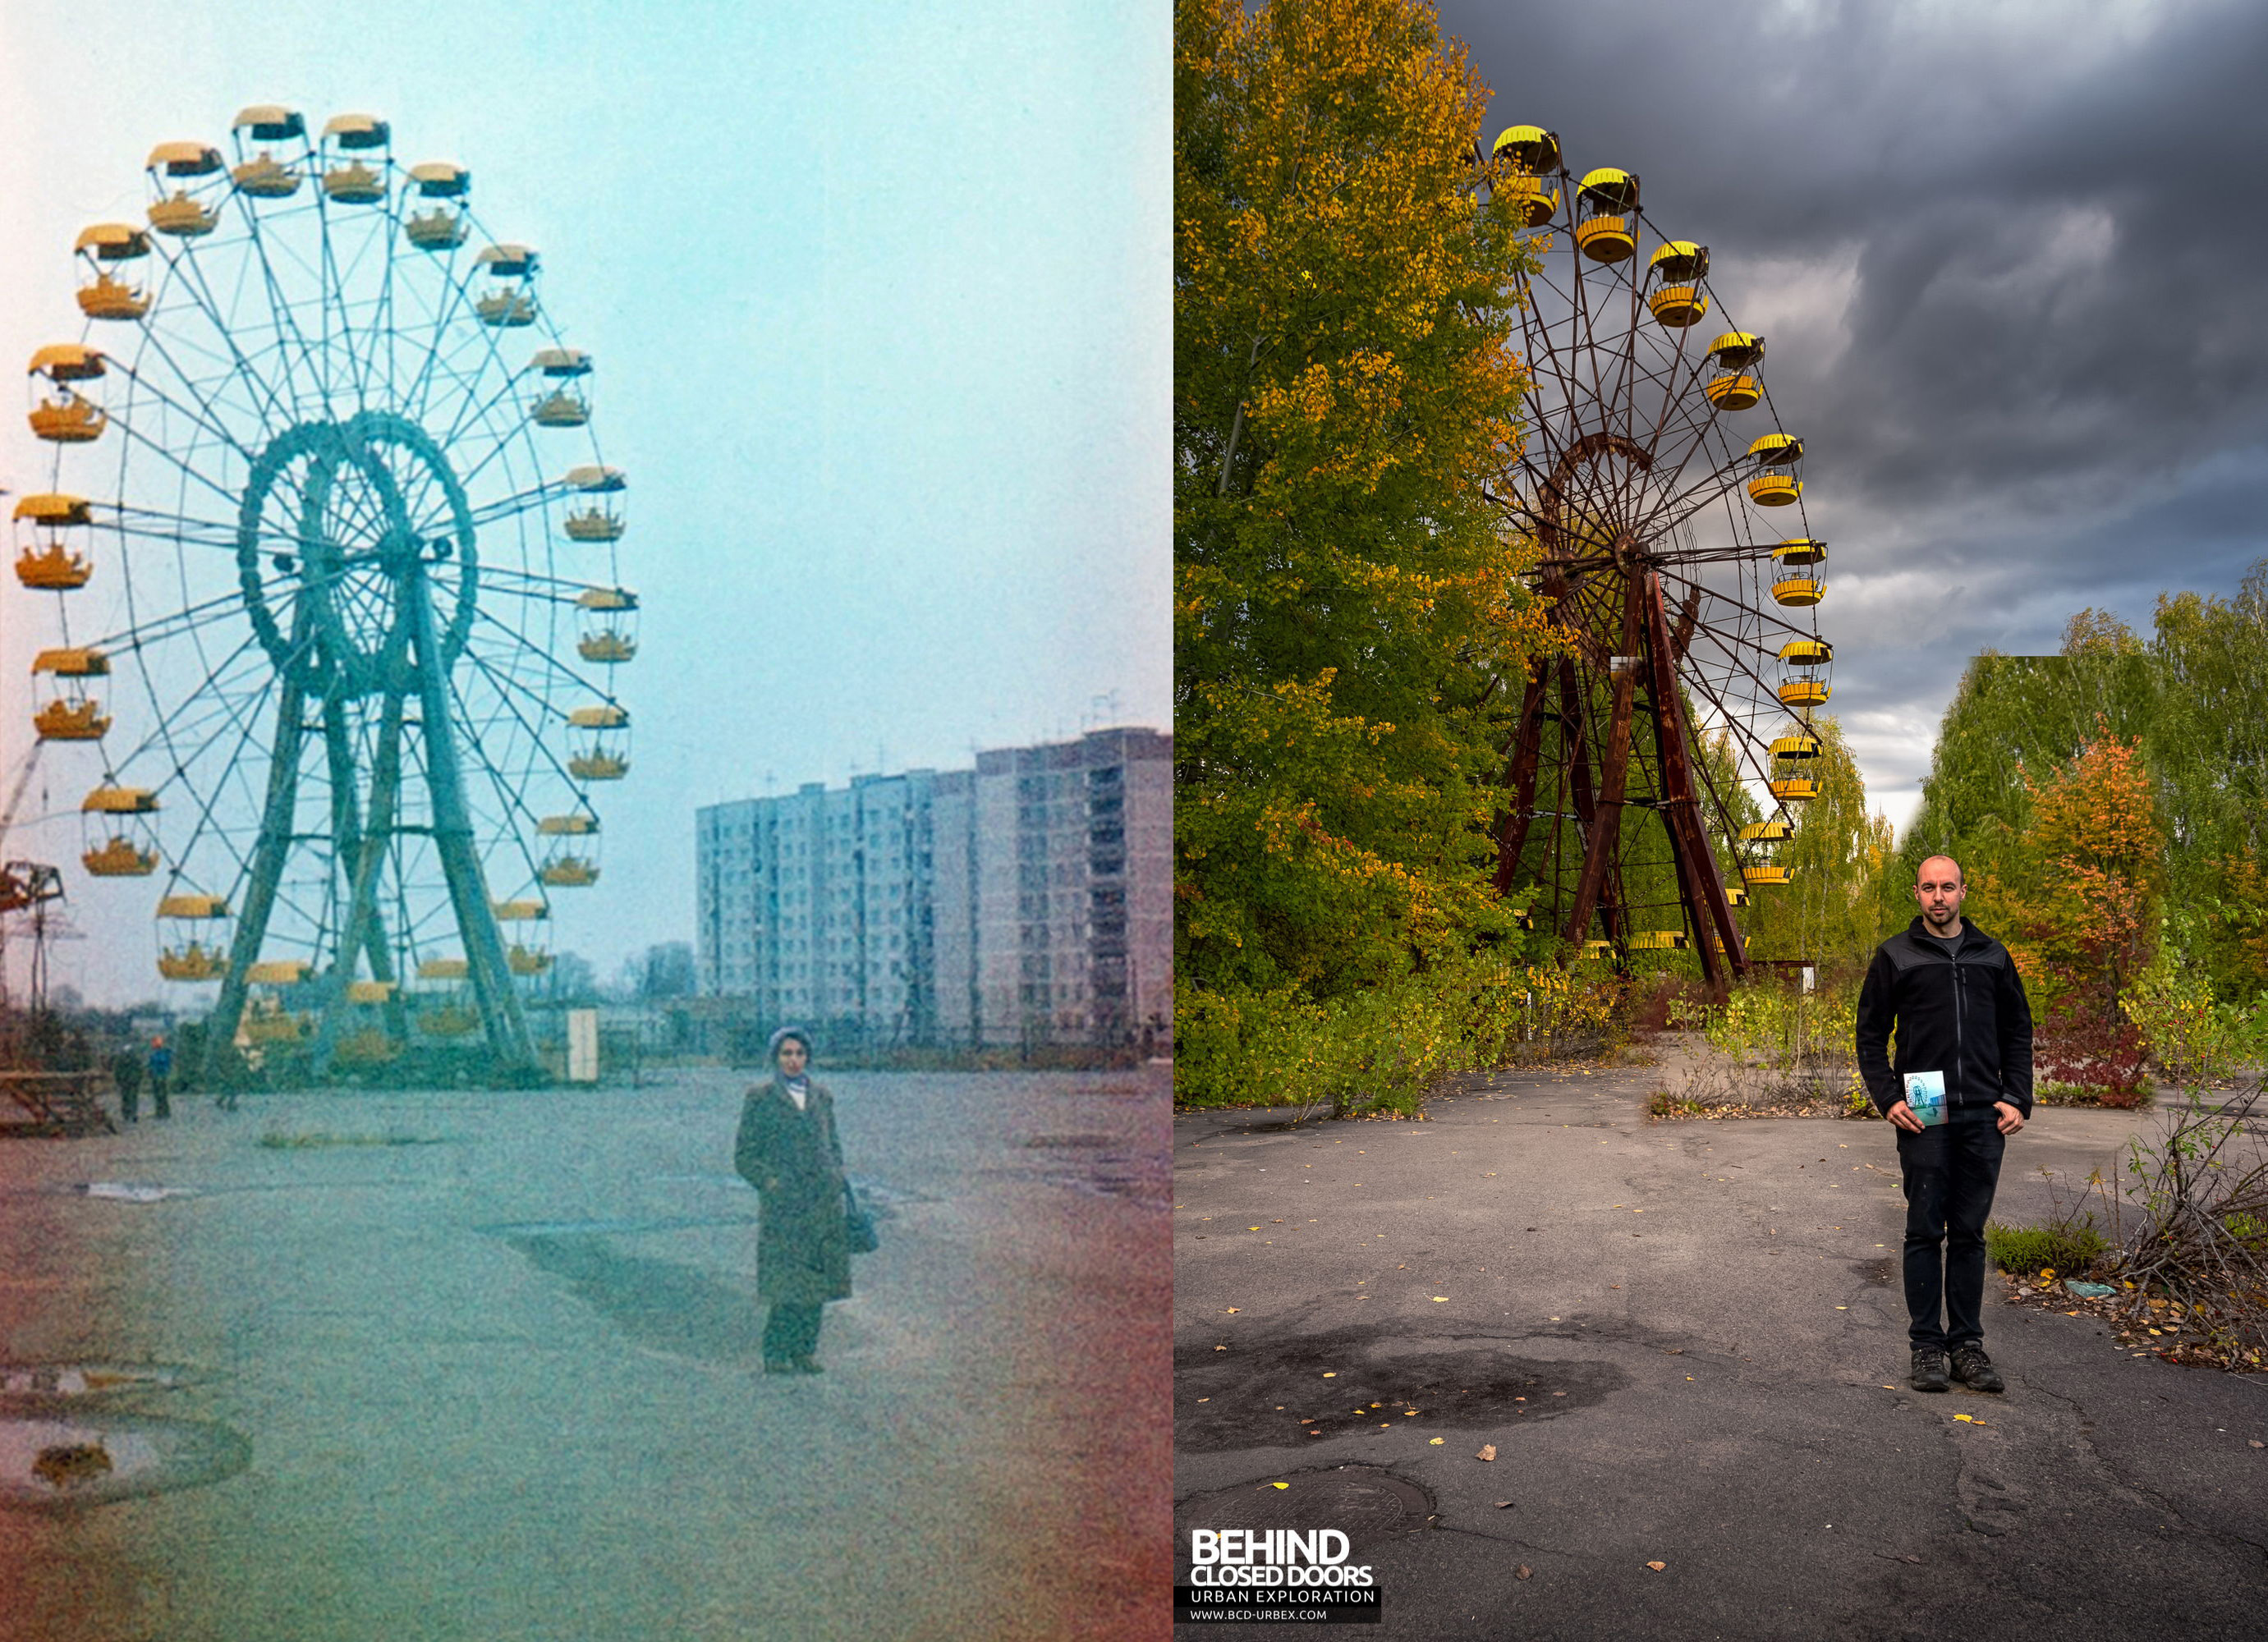 before and after chernobyl disaster